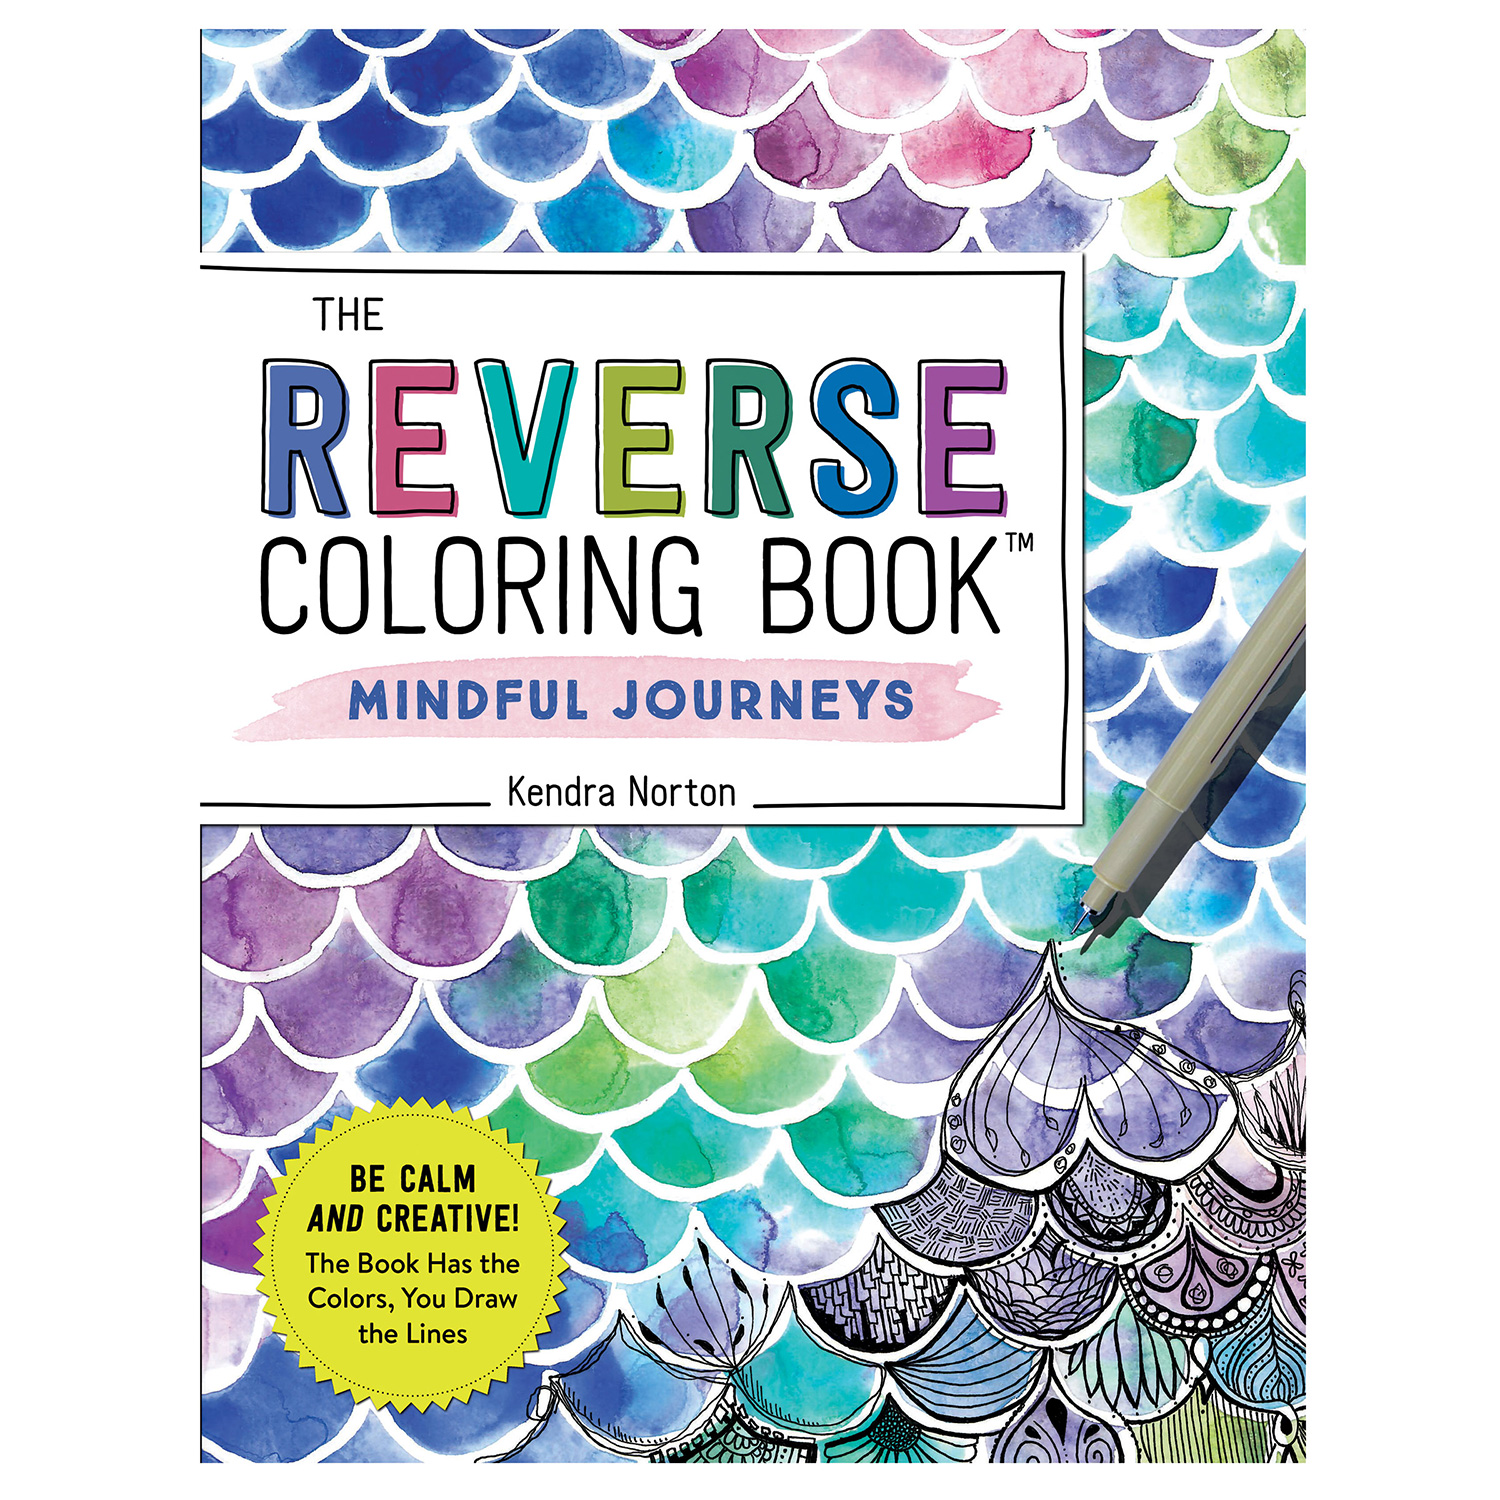 The Inverse Coloring Book: You Draw the Lines! Fun and Creative Drawing  Activity for Kids Ages 8-12, Teens, Adults, Mindfulness, and Relaxation